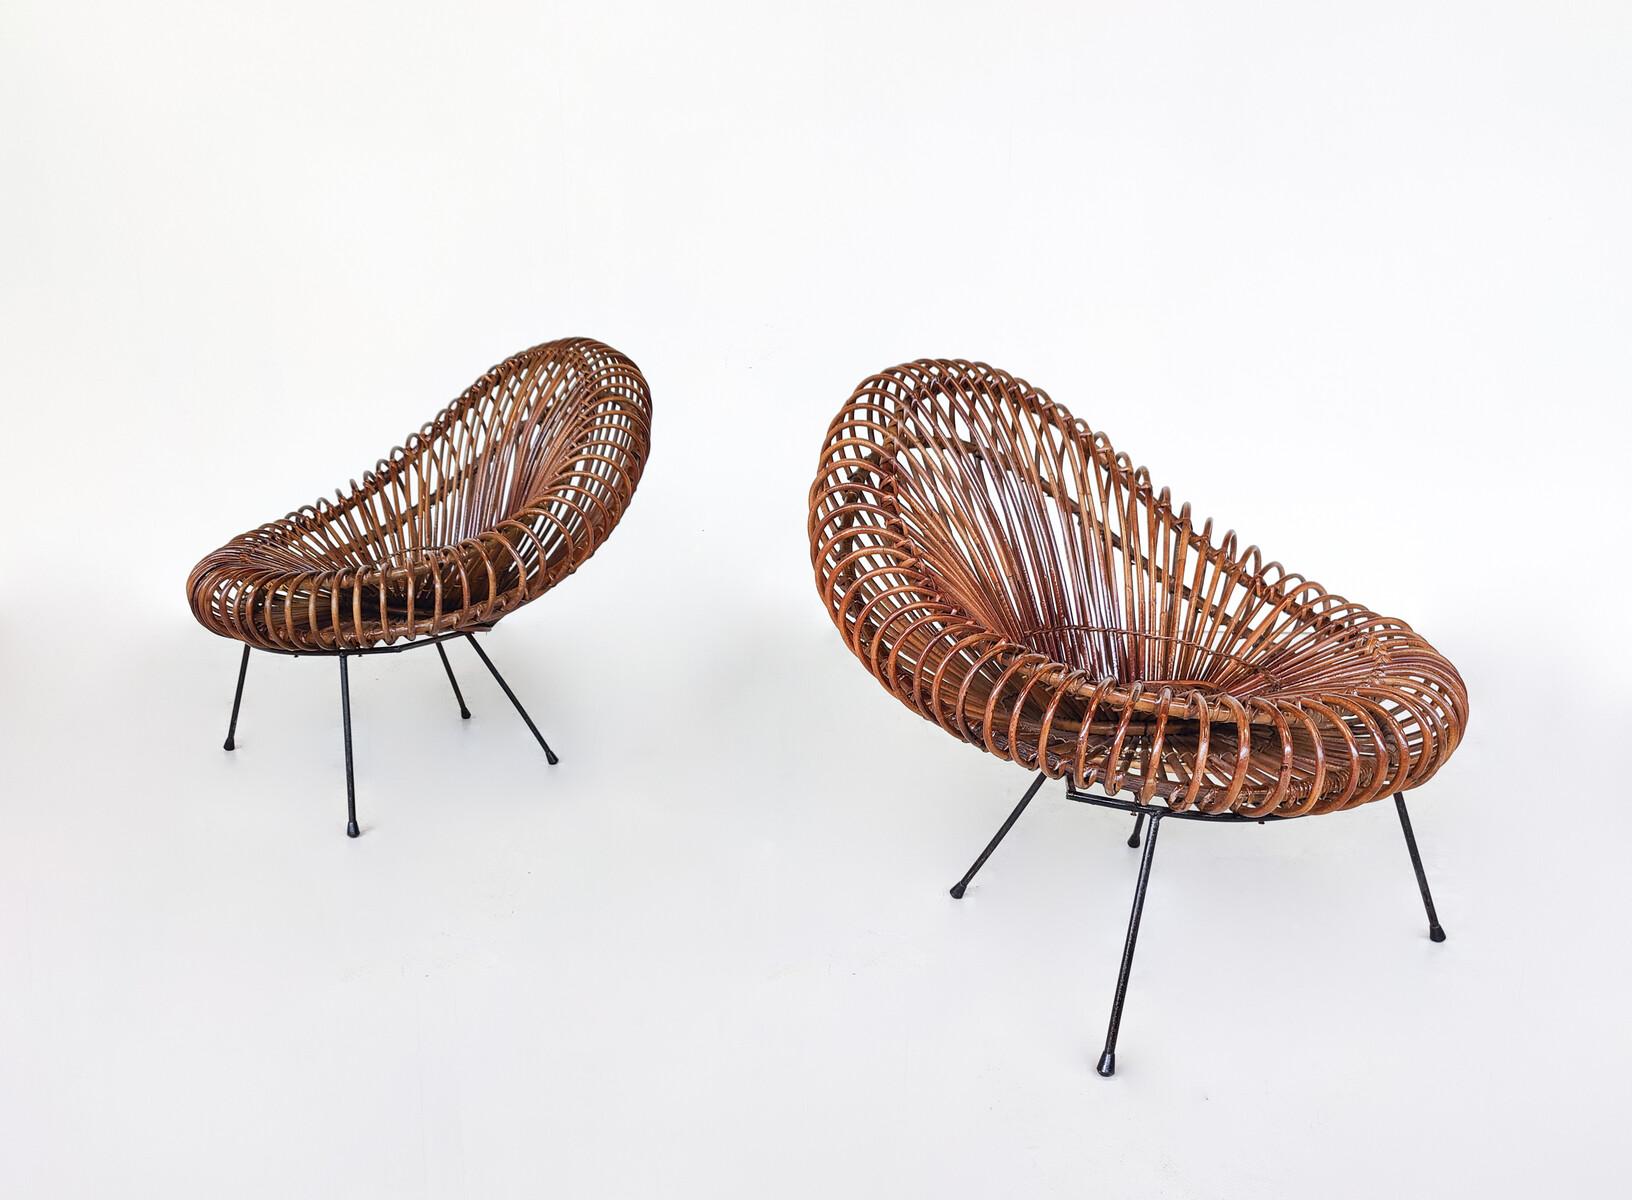 Mid-Century Modern Pair of Chairs by Janine Abraham & Dirk Jan Rol for Rougier, 1950s